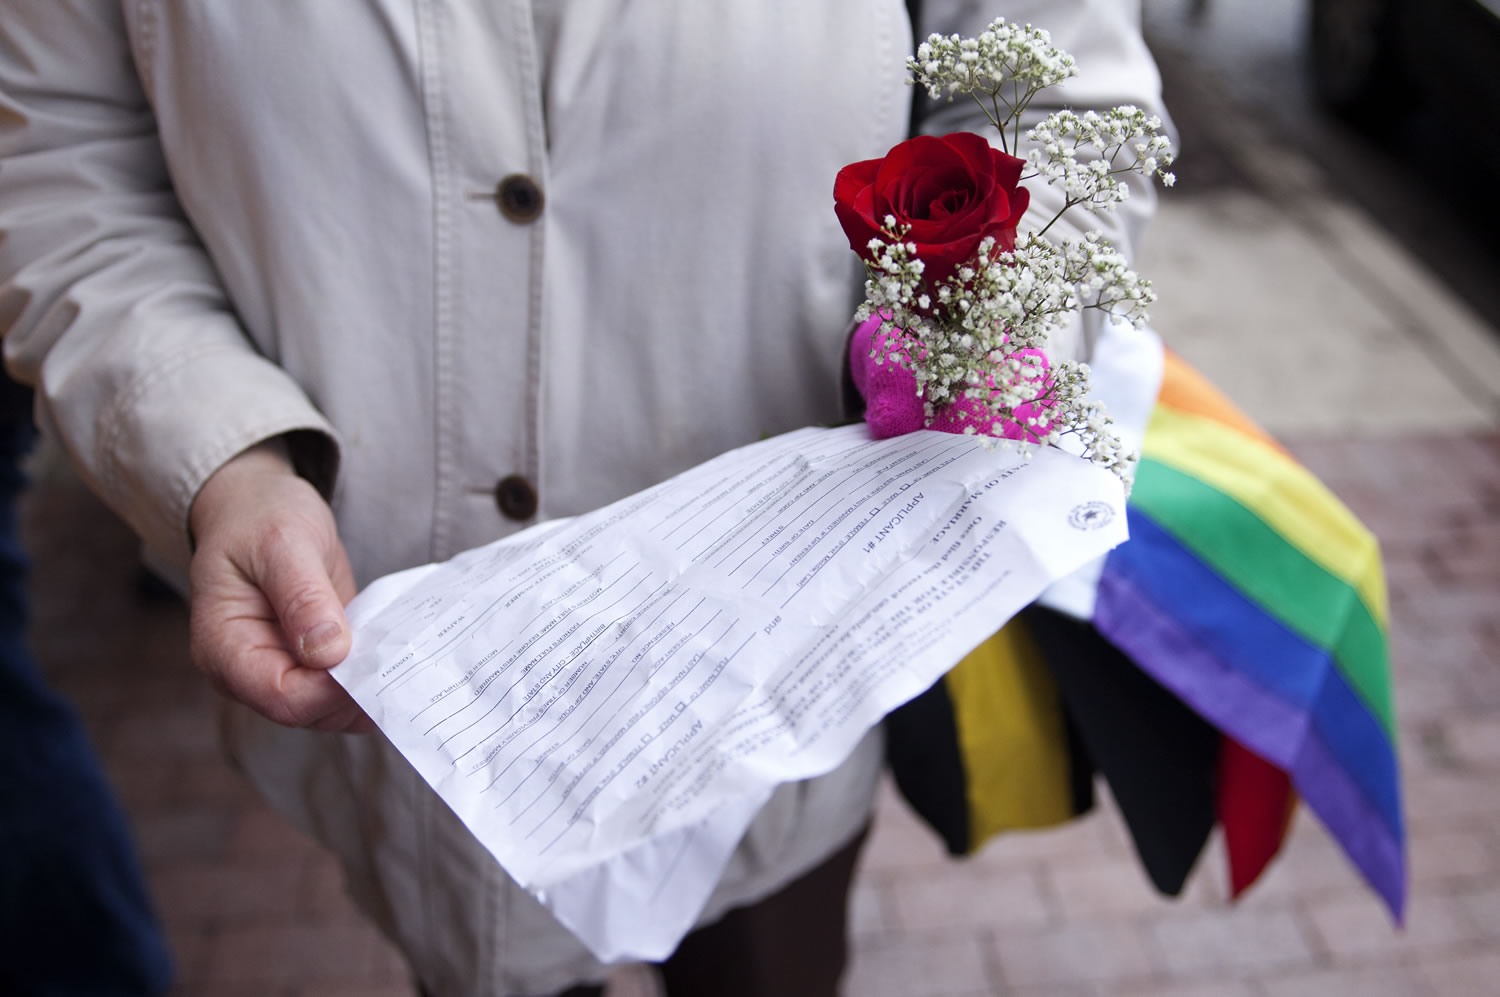 Rhonda Stoner of Ypsilanti, Mich., holds an application for a marriage license as she waits Saturday at the Washtenaw County Clerks office in Ann Arbor, Mich.